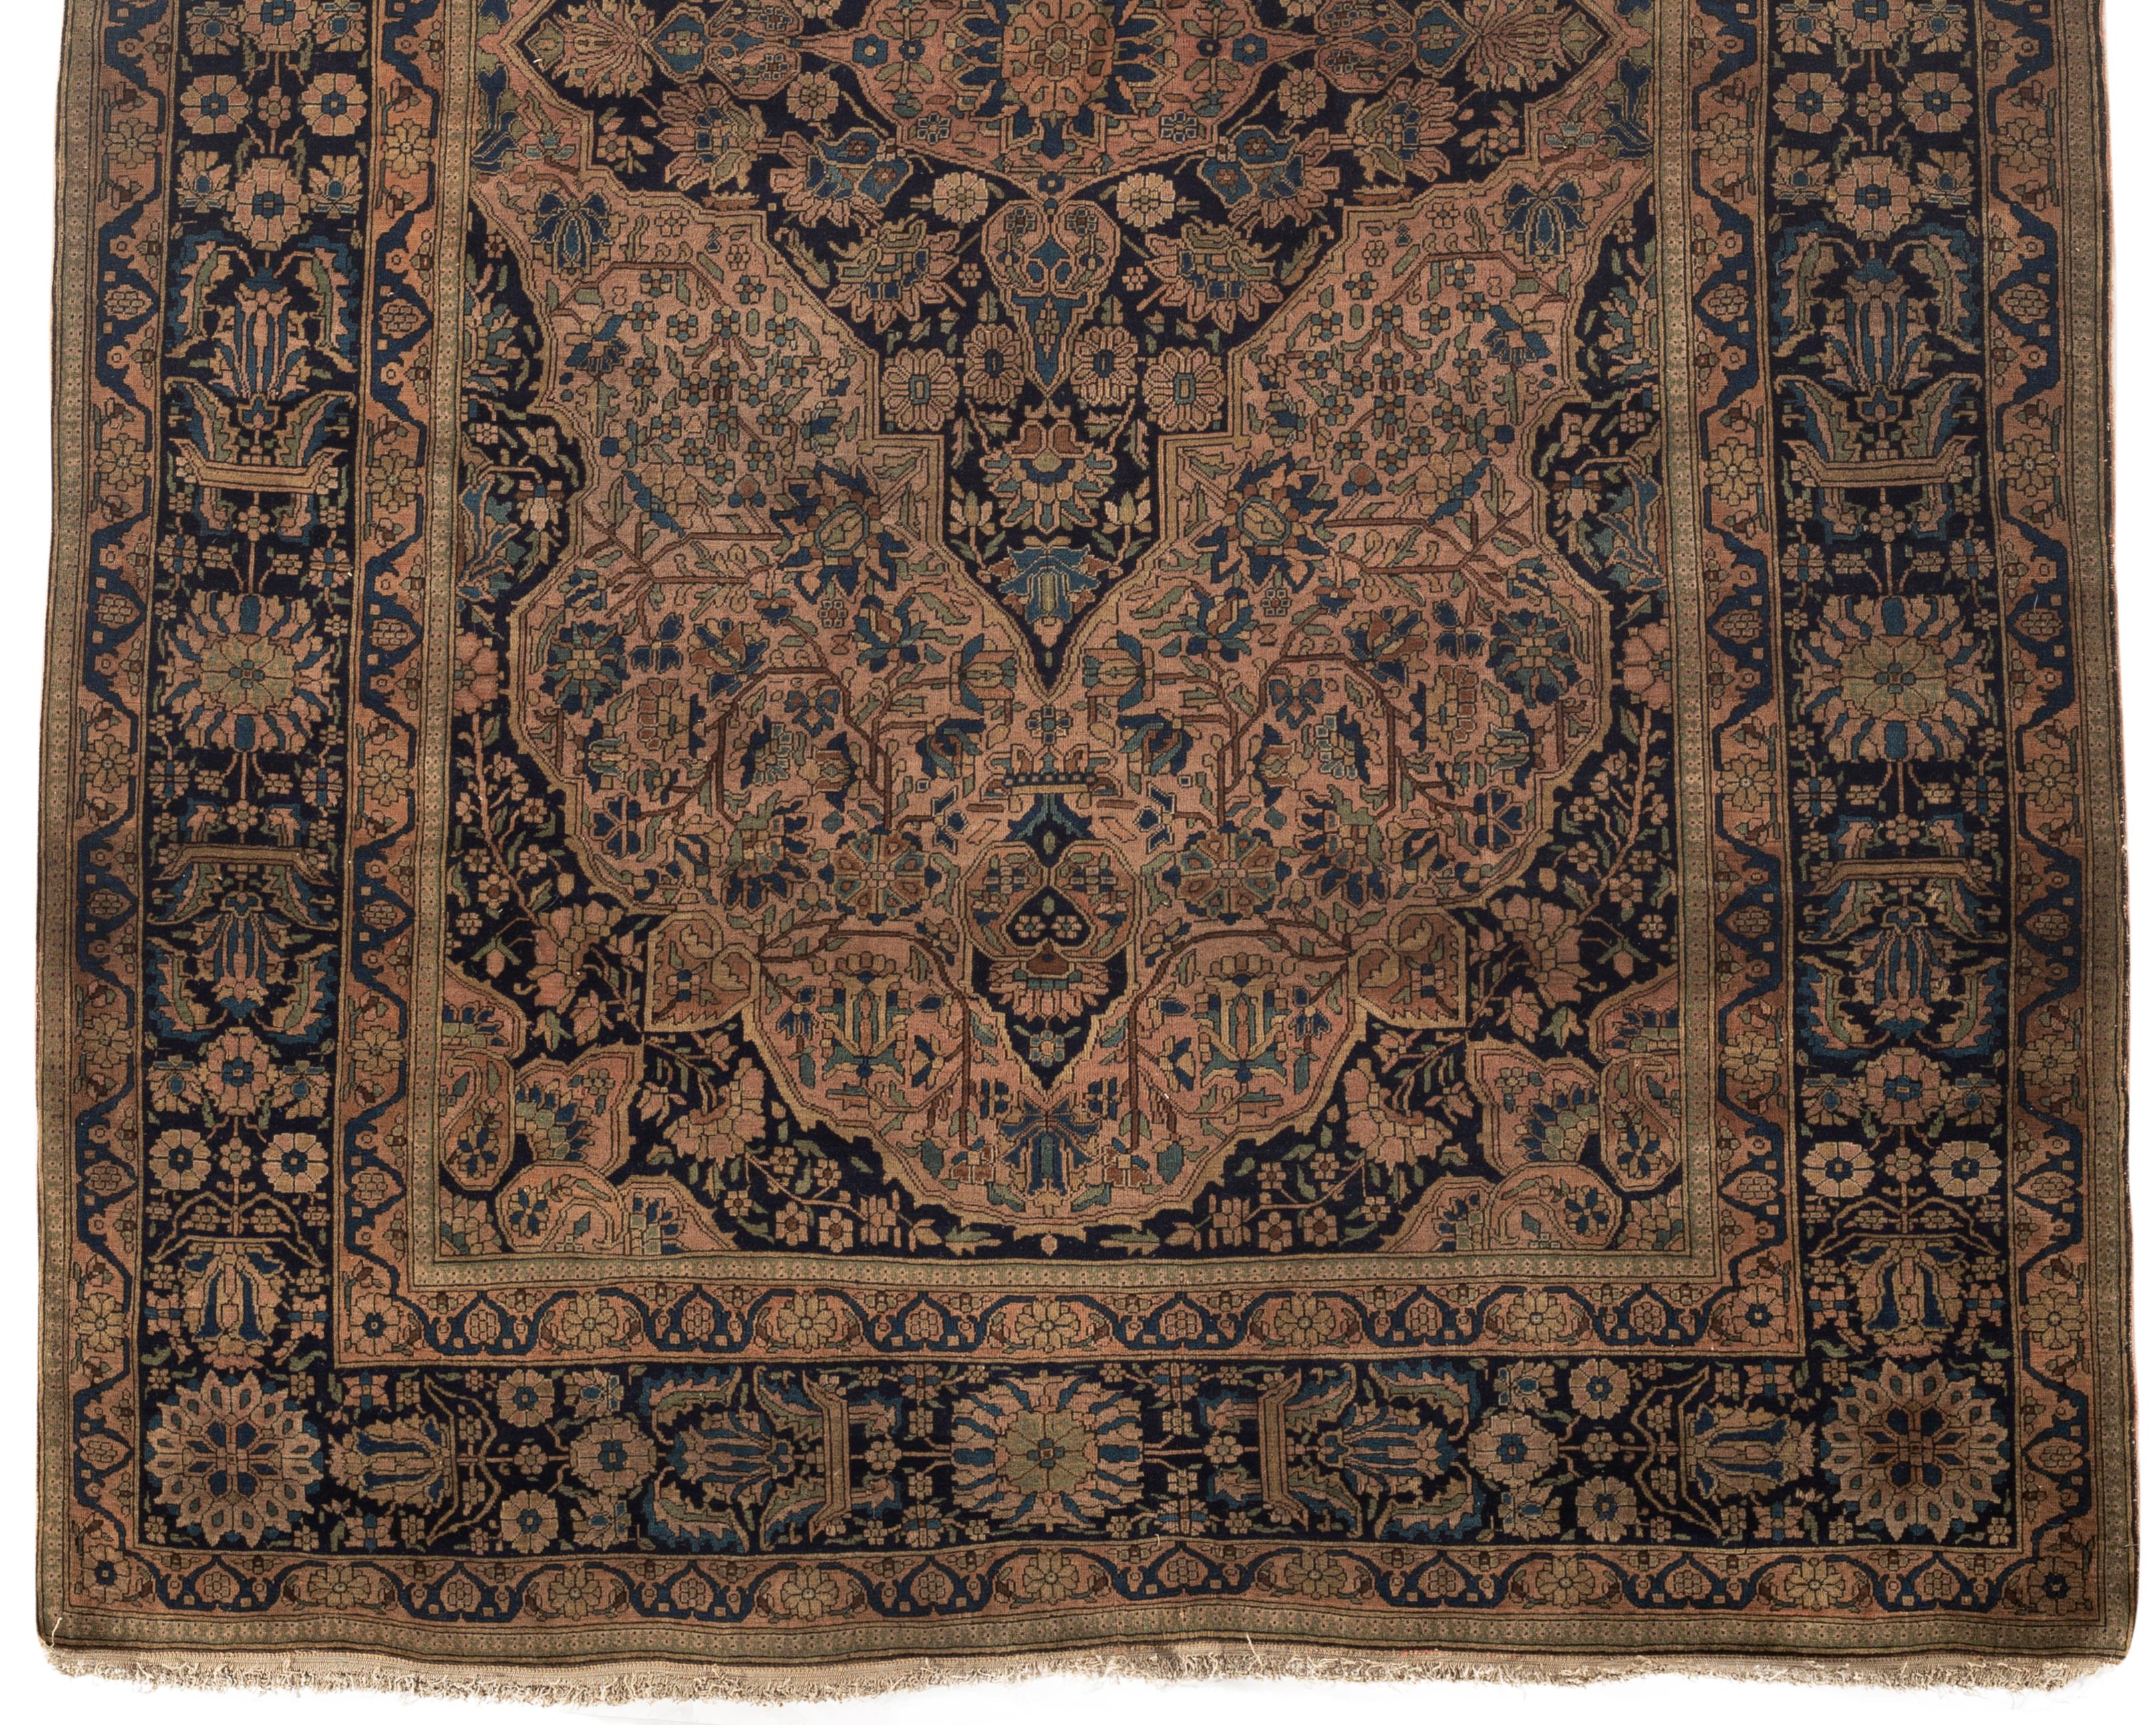 Antique Kashan Mohtashem Rose / Navy Rug, circa 1880. Mohtashem signifies the name of the master weaver whose works belong at the top of the highest category of rugs. In the later 19th century carpet weaving was revived by Hajji Mollah Hasan